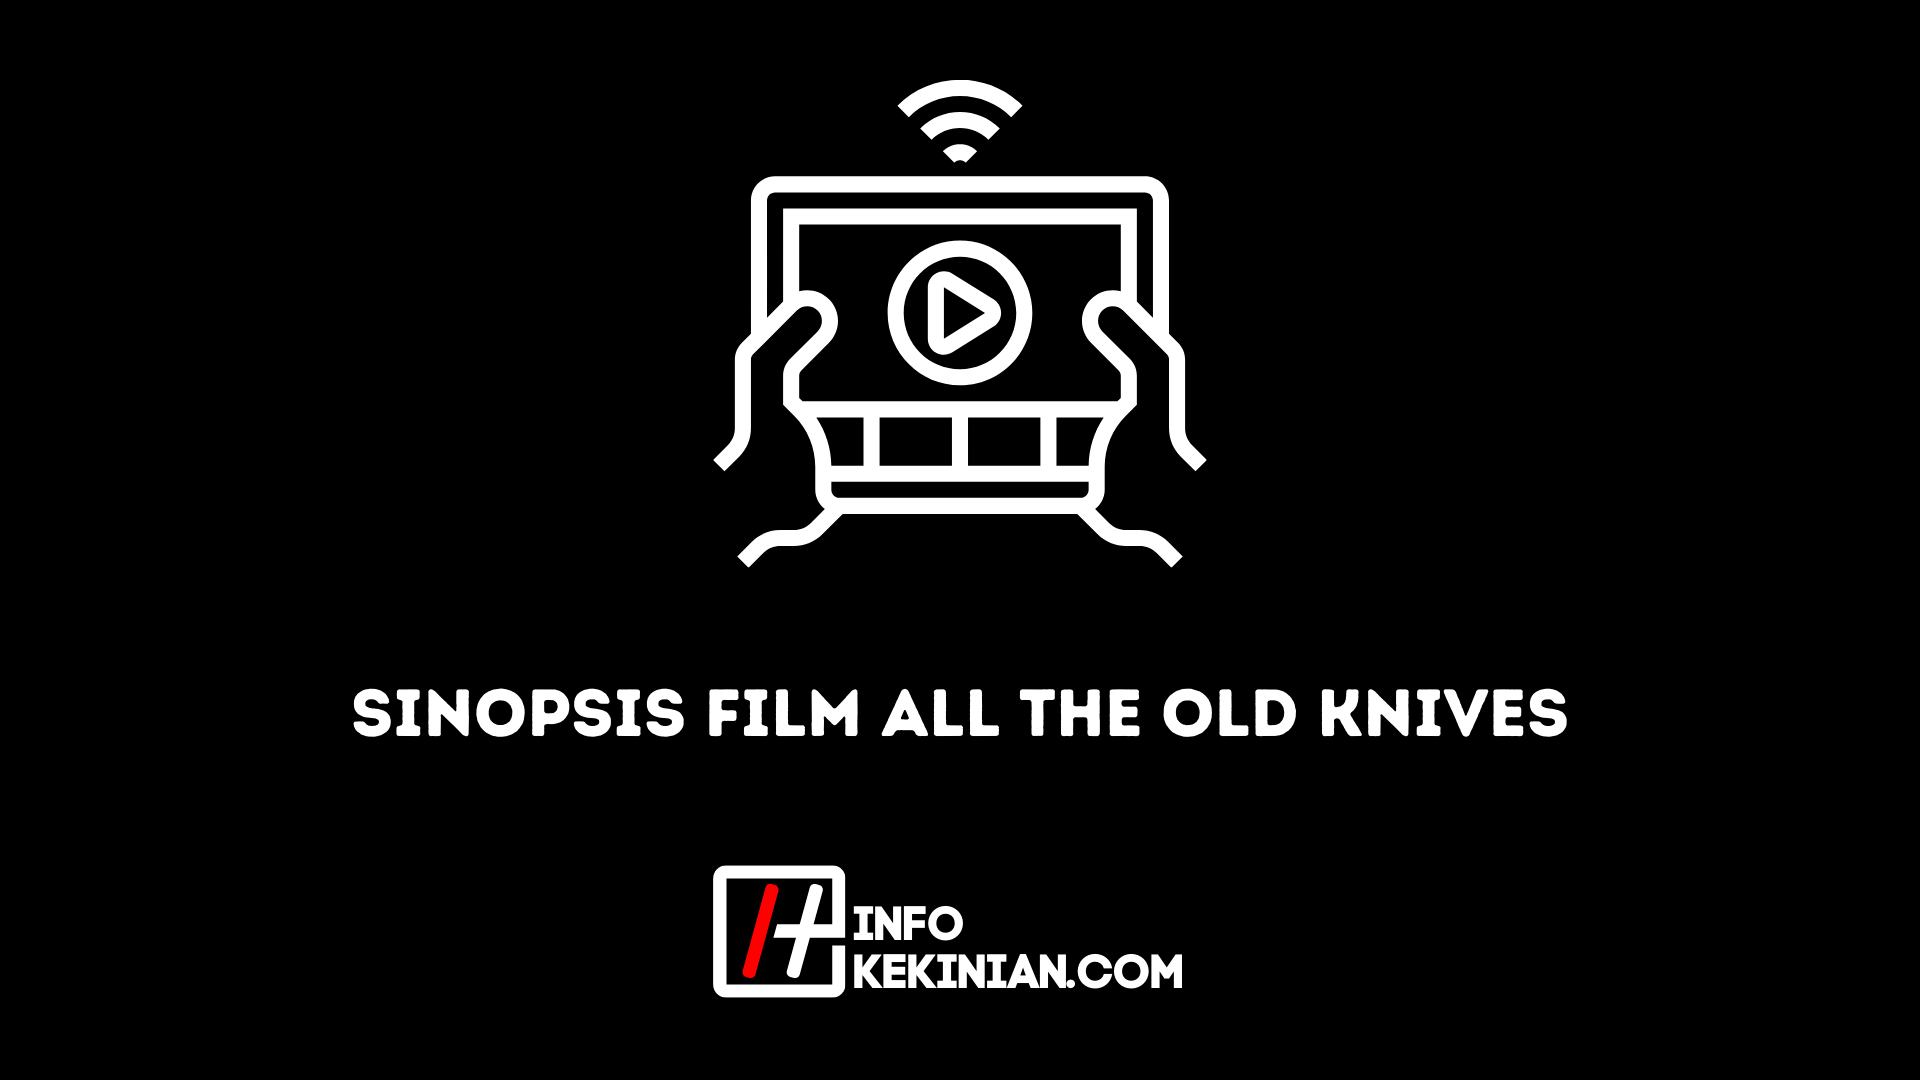 Sinopsis Film All the Old Knives